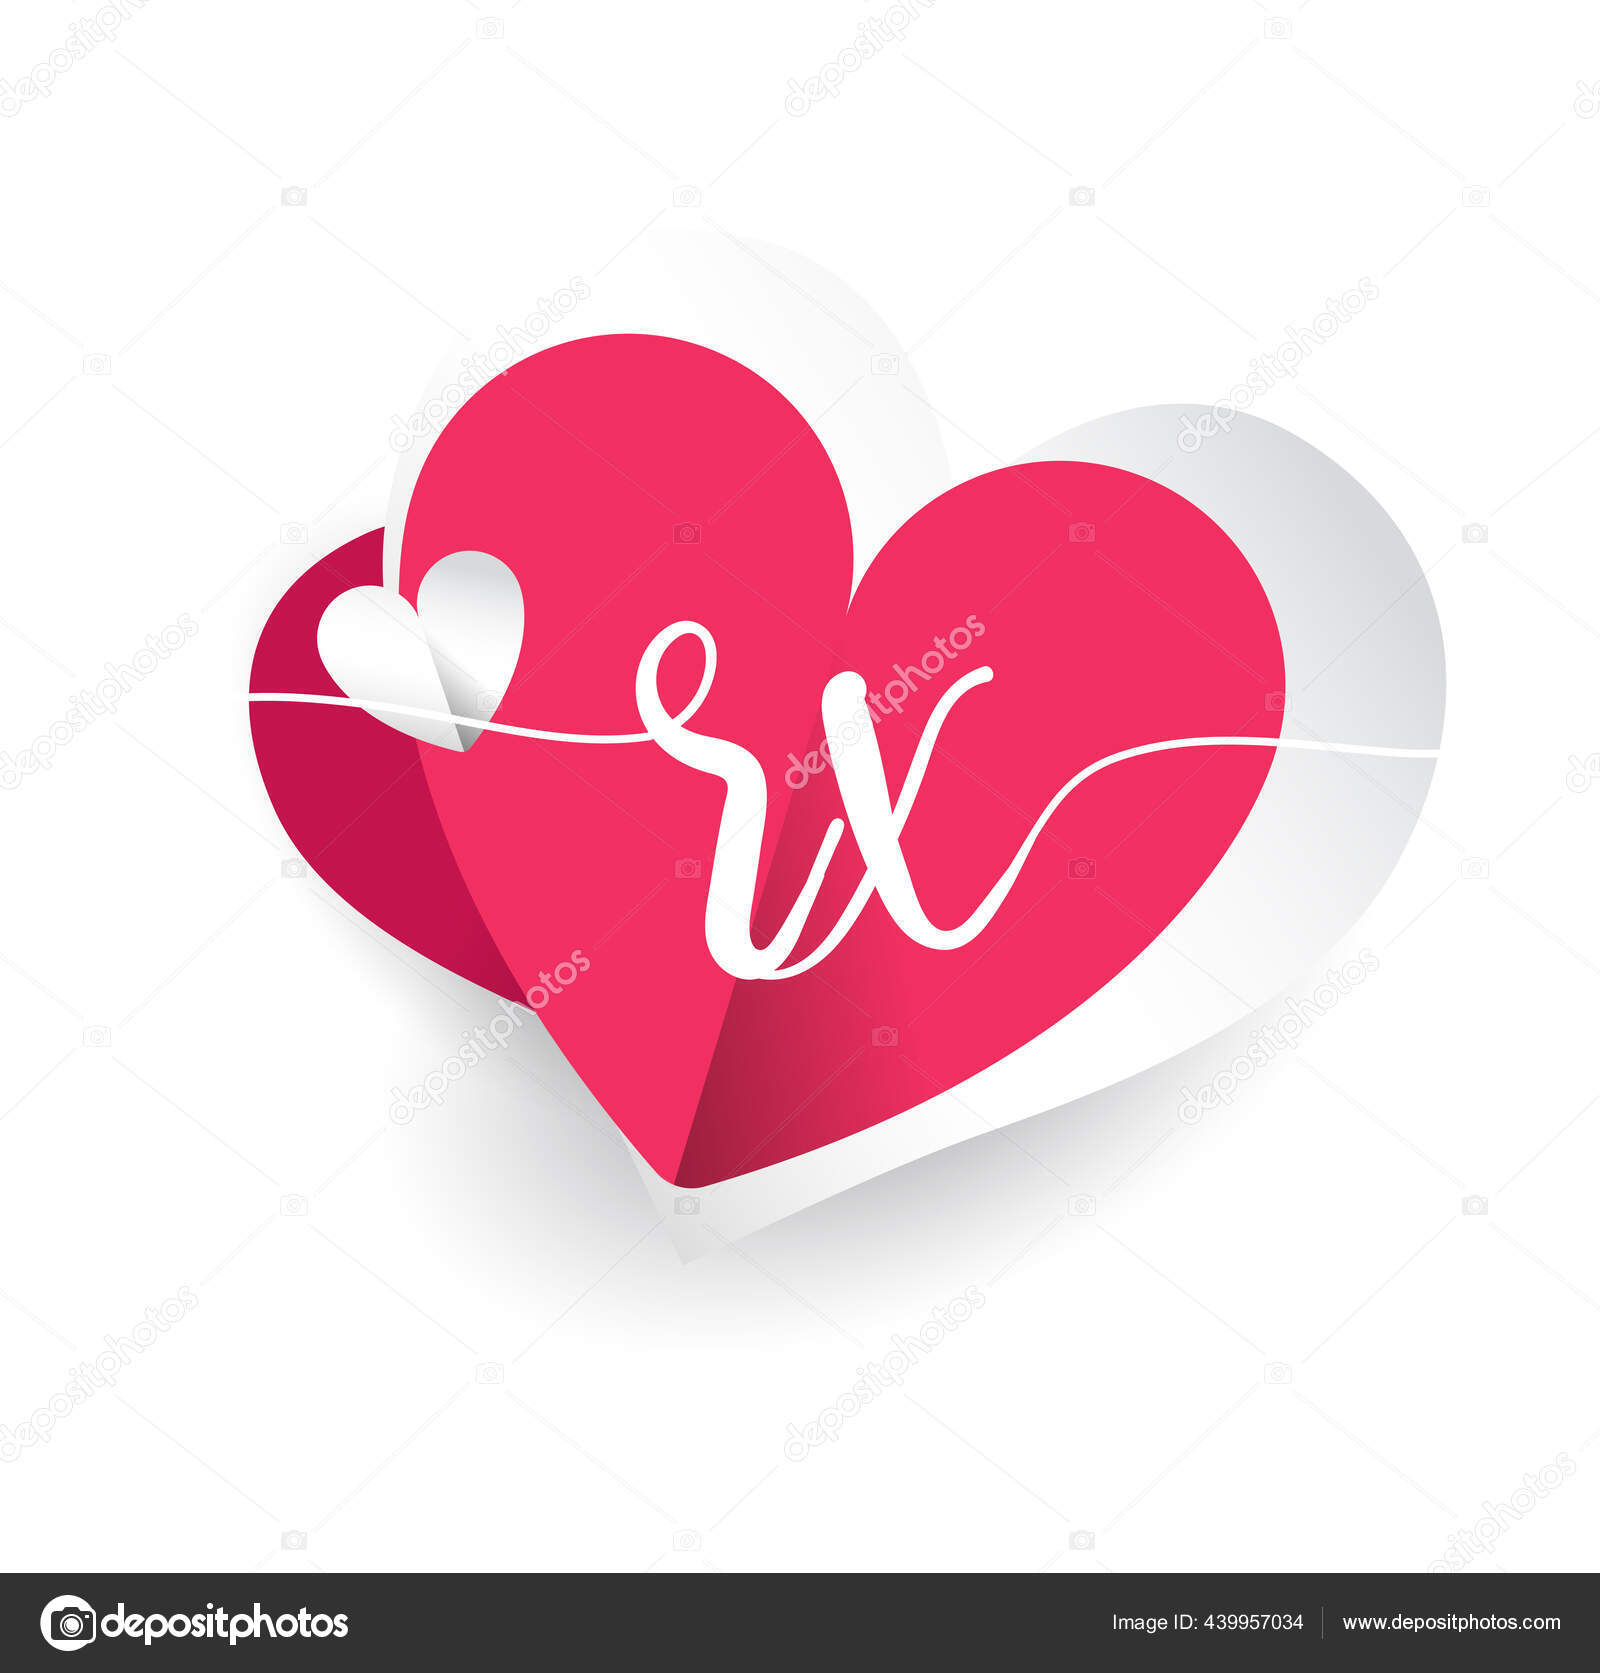 Initial Logo Letter Heart Shape Red Colored Logo Design Wedding Stock  Vector by ©wikaGrahic 439955664